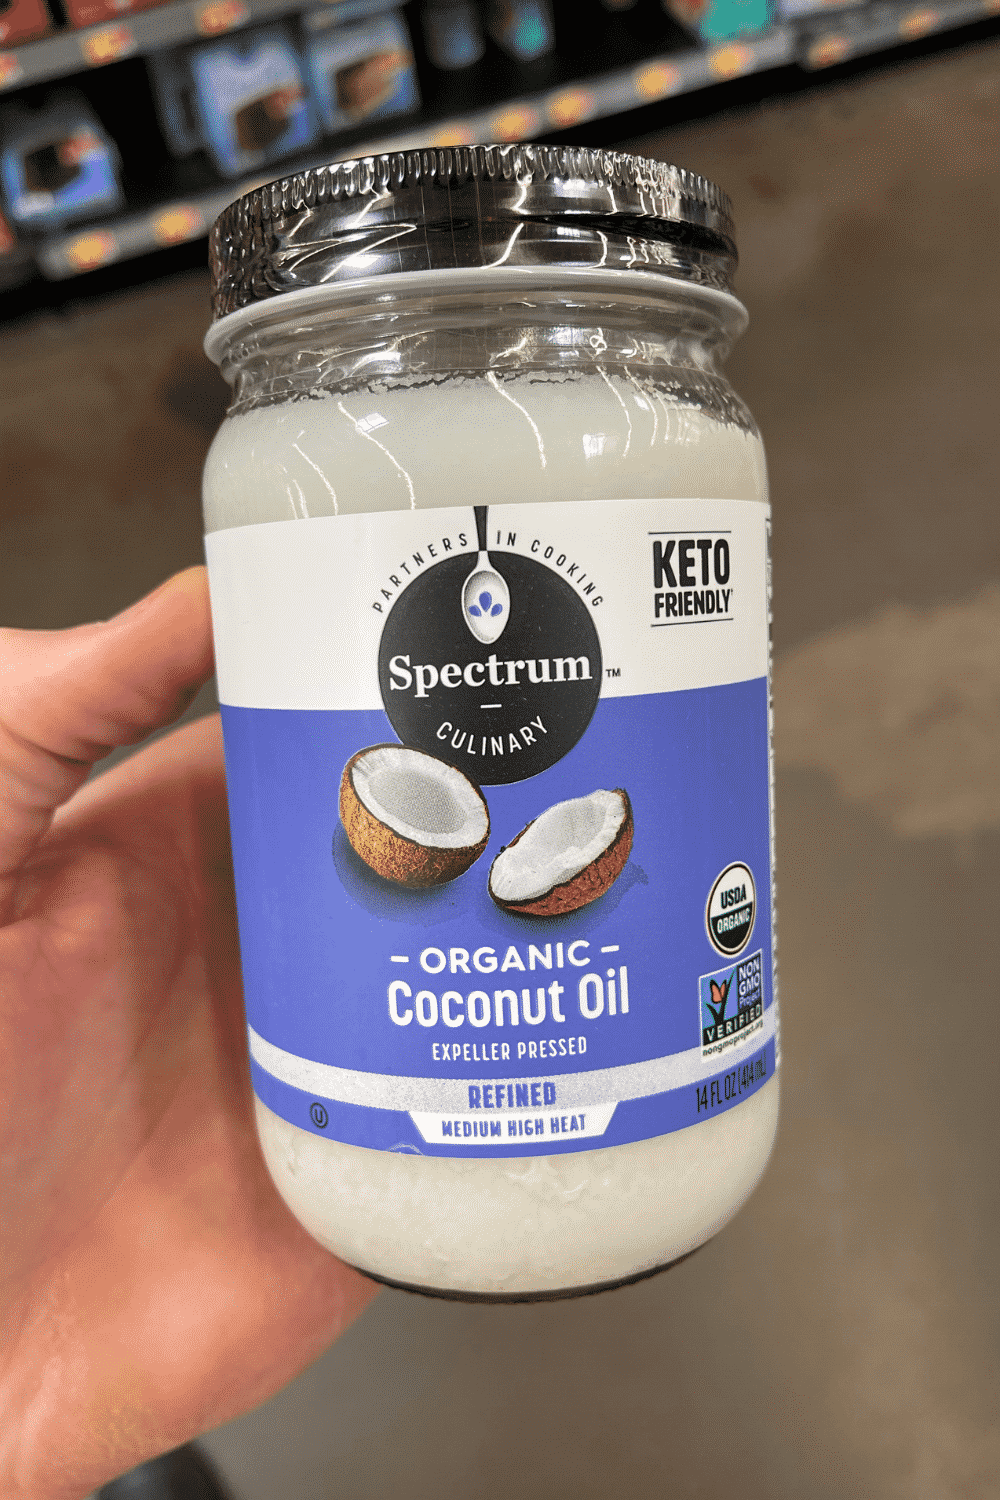 A hand holding a bottle of refined coconut oil.